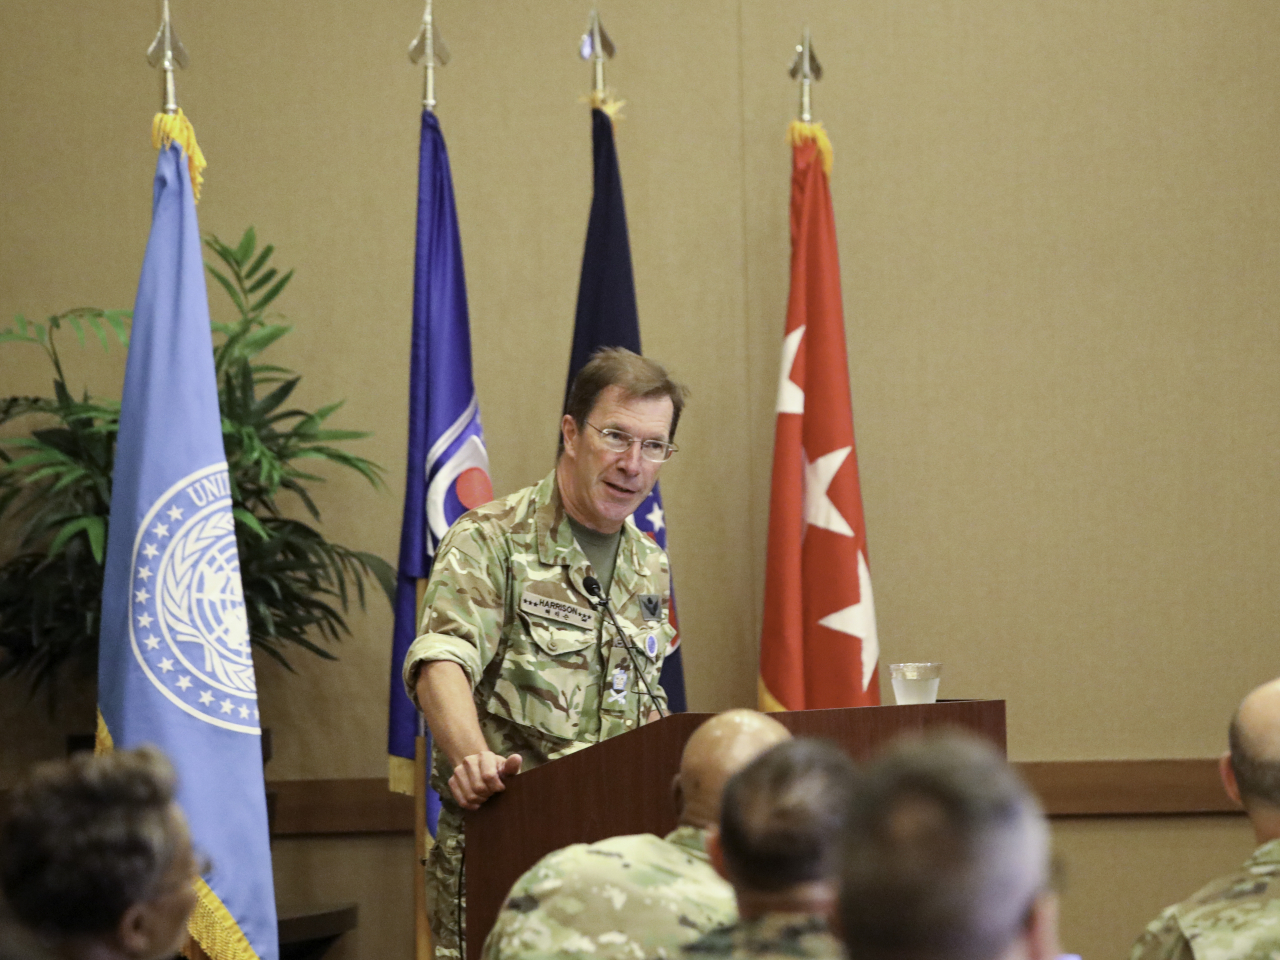 British Lt. Gen. Andrew Harrison, the deputy commander of the United Nations Command, delivers his opening speech on Tuesday during the inaugural Women, Peace, and Security Symposium jointly organized by the United States Forces Korea, United Nations Command and Combined Forces Command in Pyeongtaek, Gyeonggi Province. (Photo - United States Forces Korea)